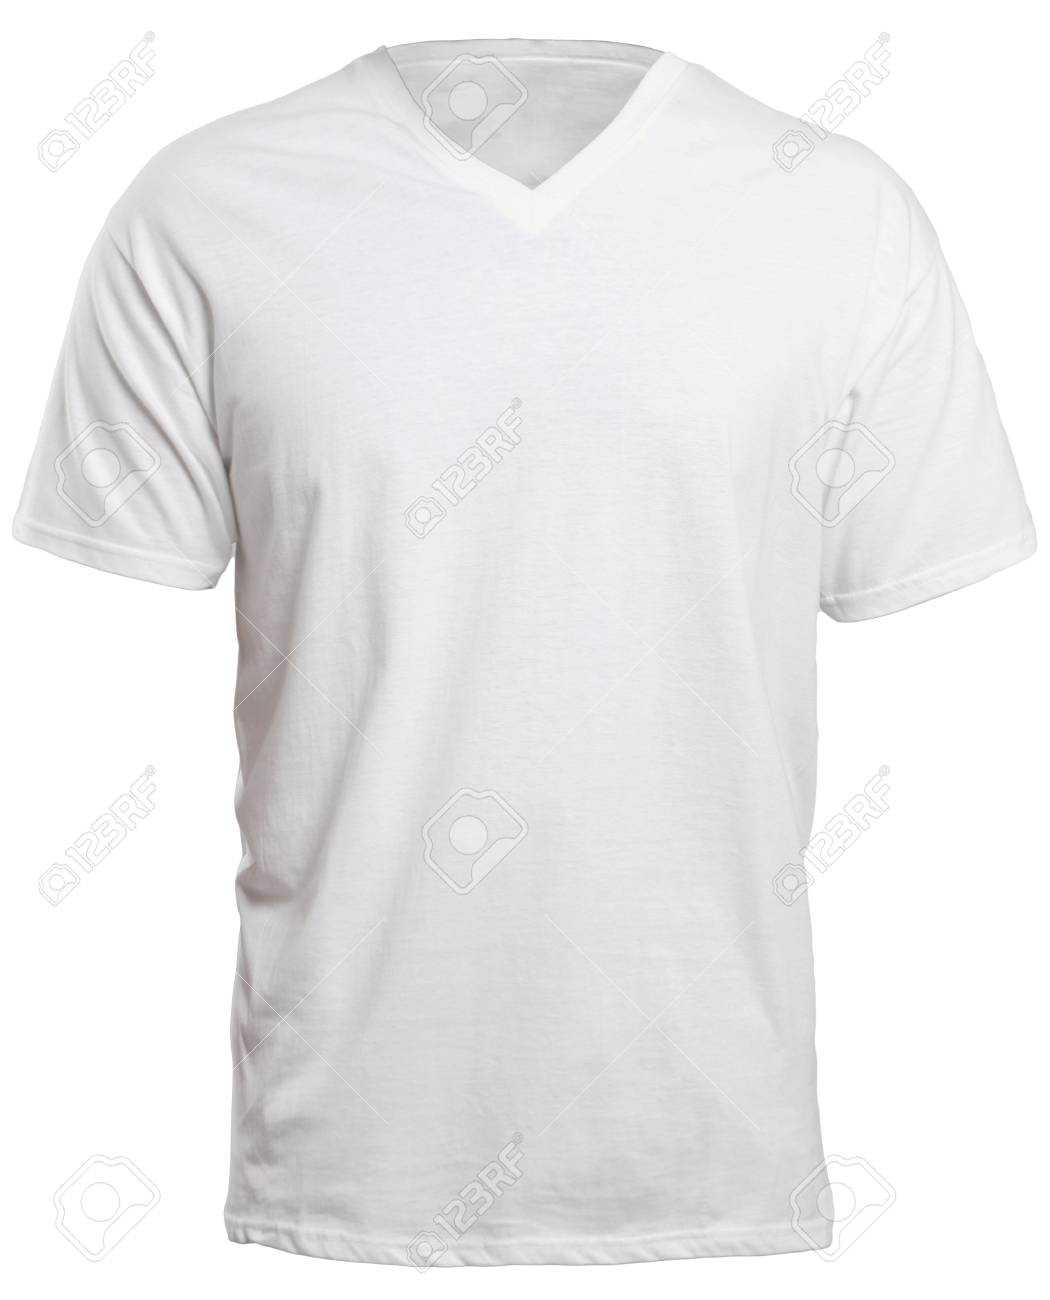 Blank V Neck Shirt Mock Up Template, Front View, Isolated On.. Within Blank V Neck T Shirt Template